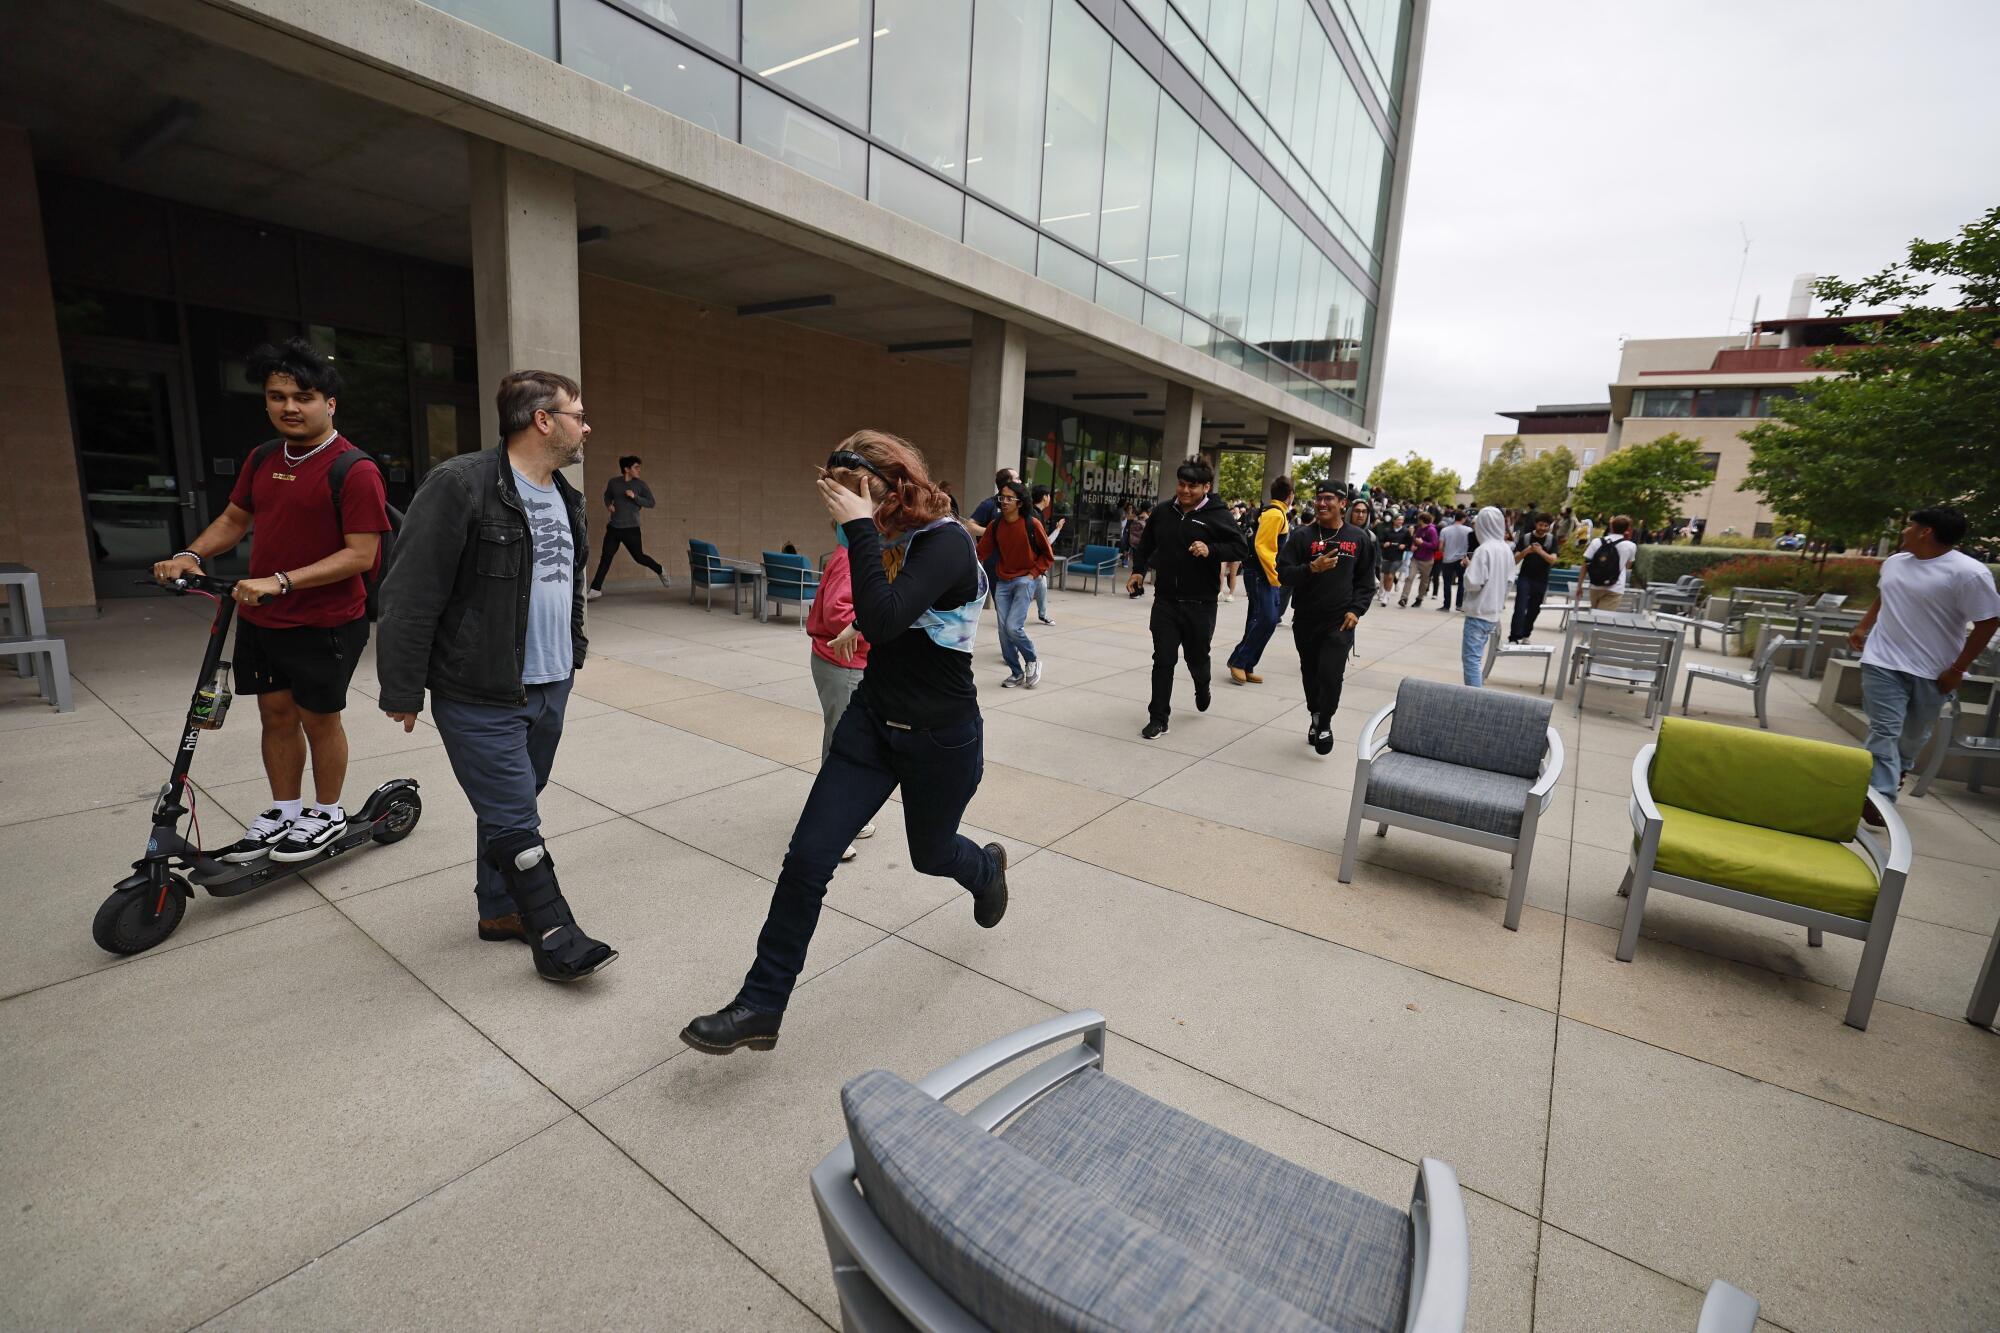 People flee the area after a weeks-long pro-Palestine protest at UC Irvine demanding